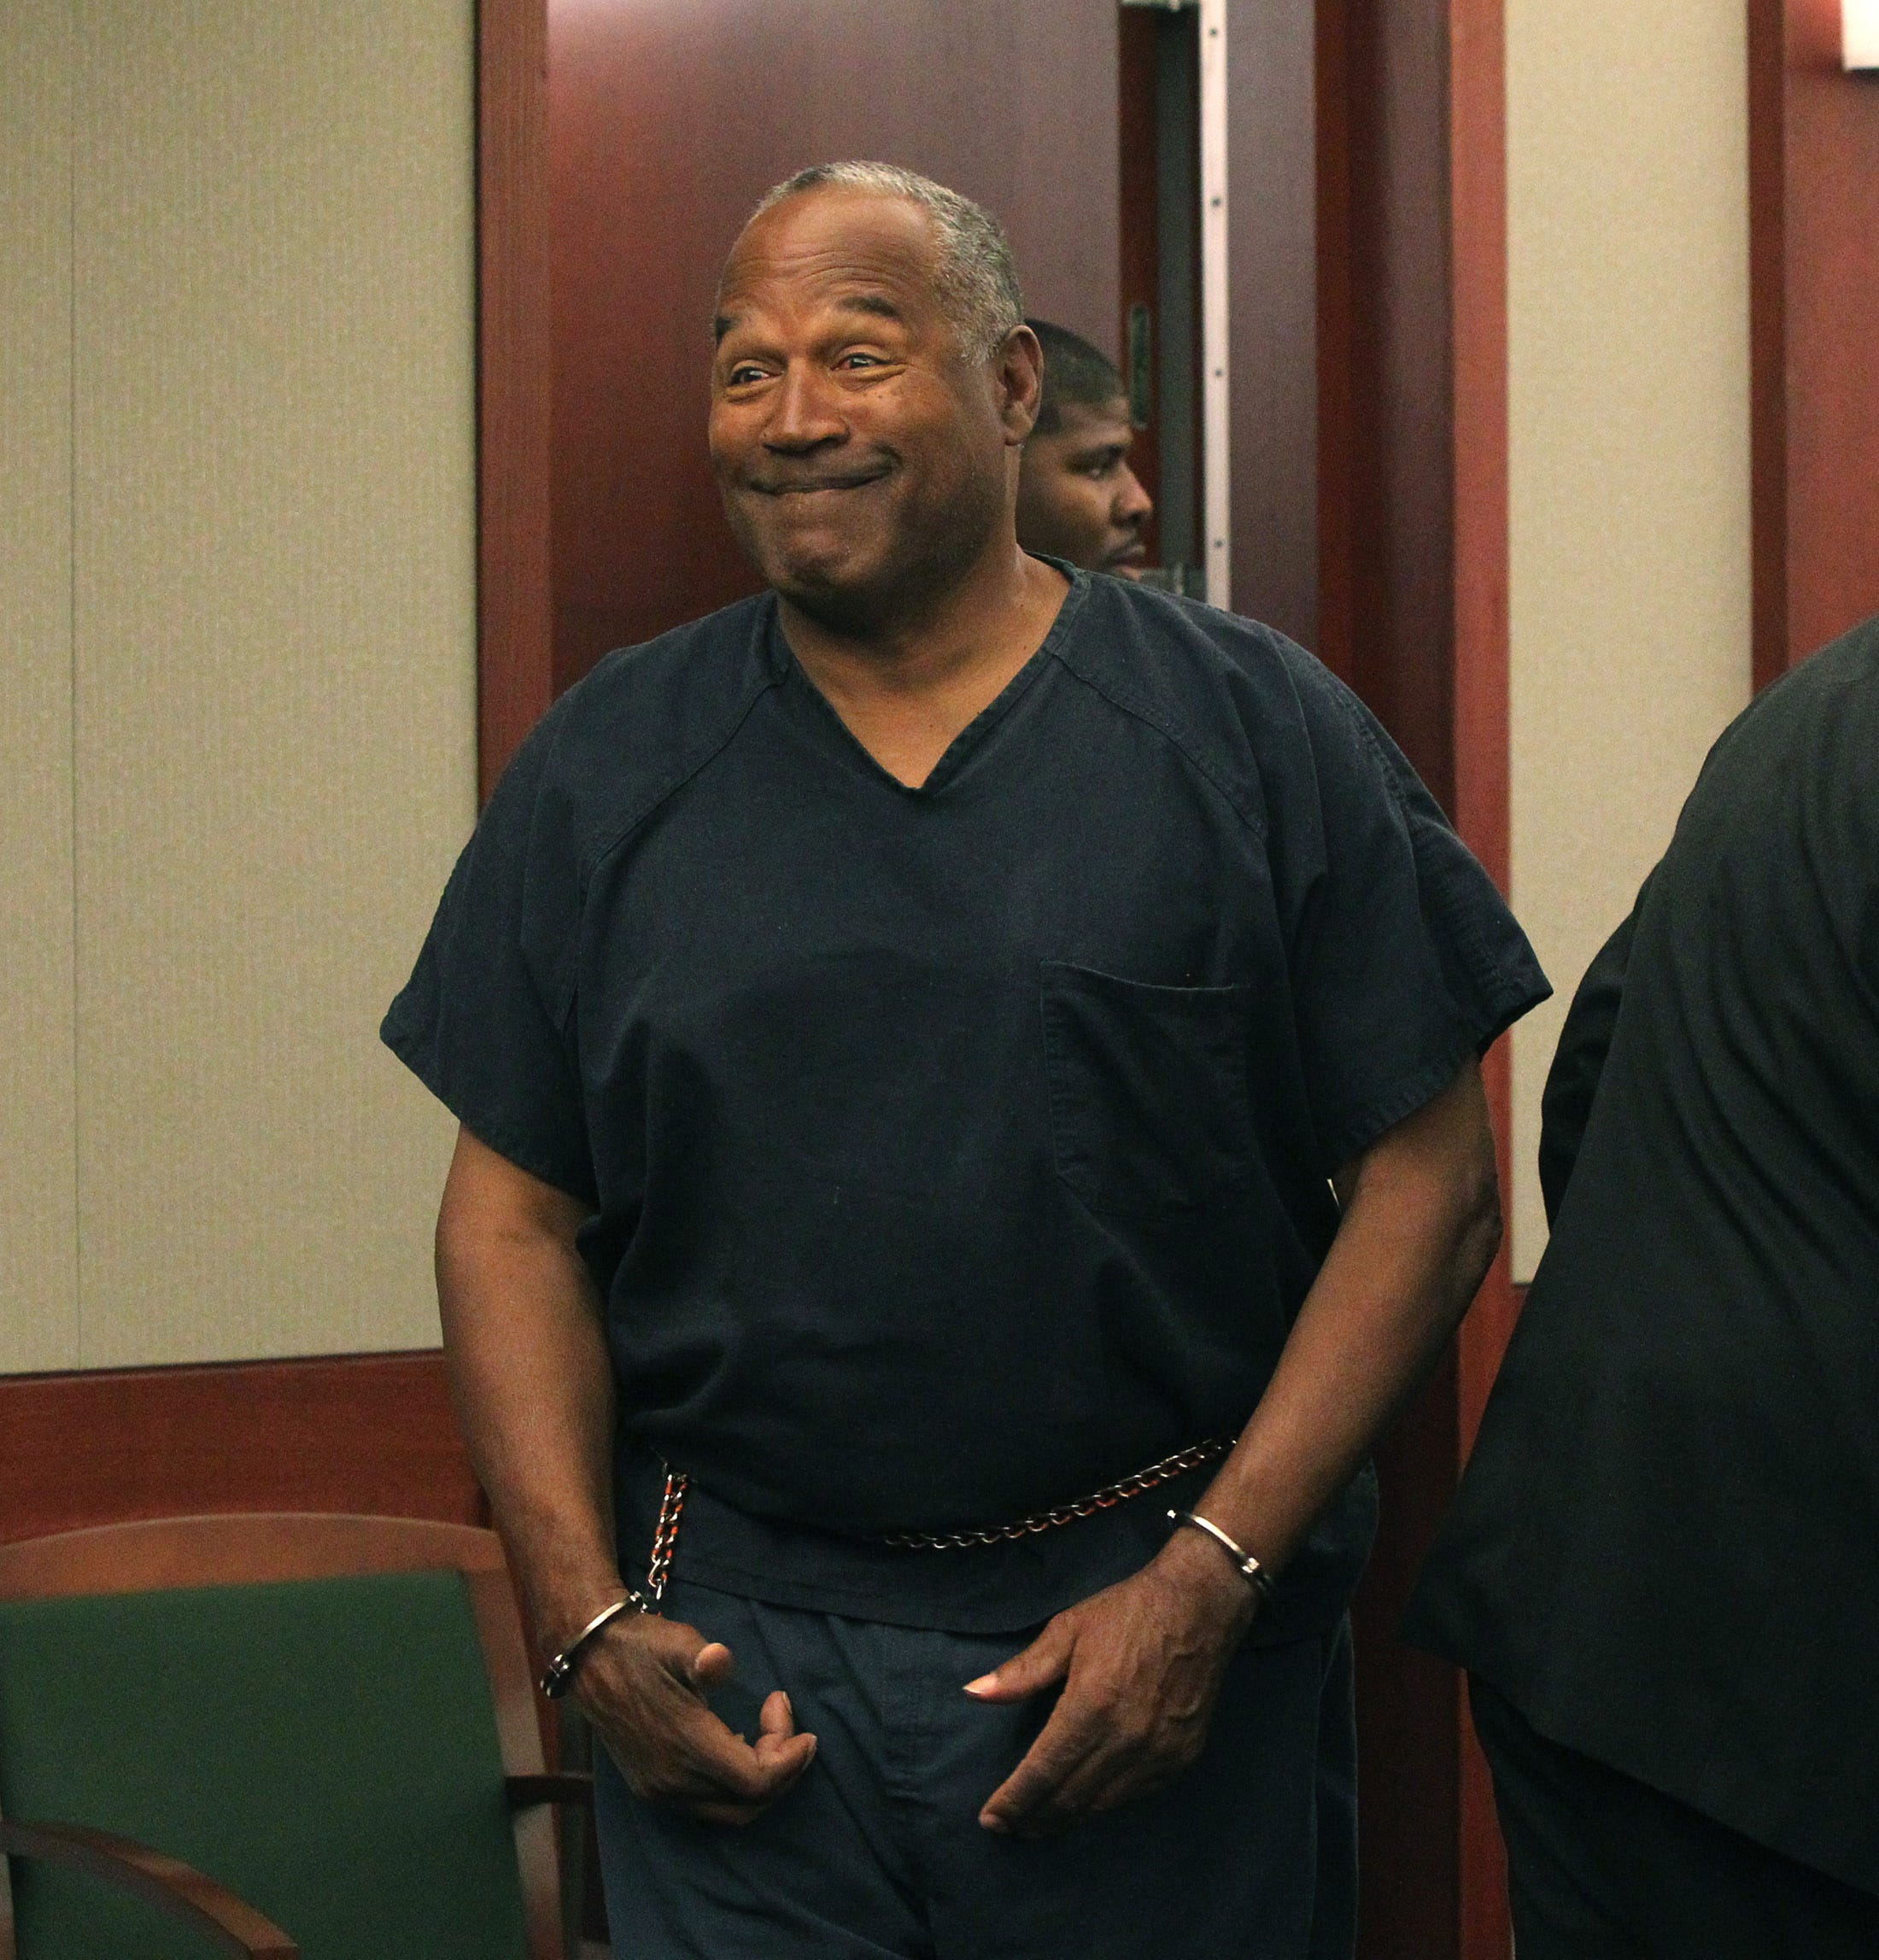 'You look great for 90!' Parole commissioner misstates O.J. Simpson's age